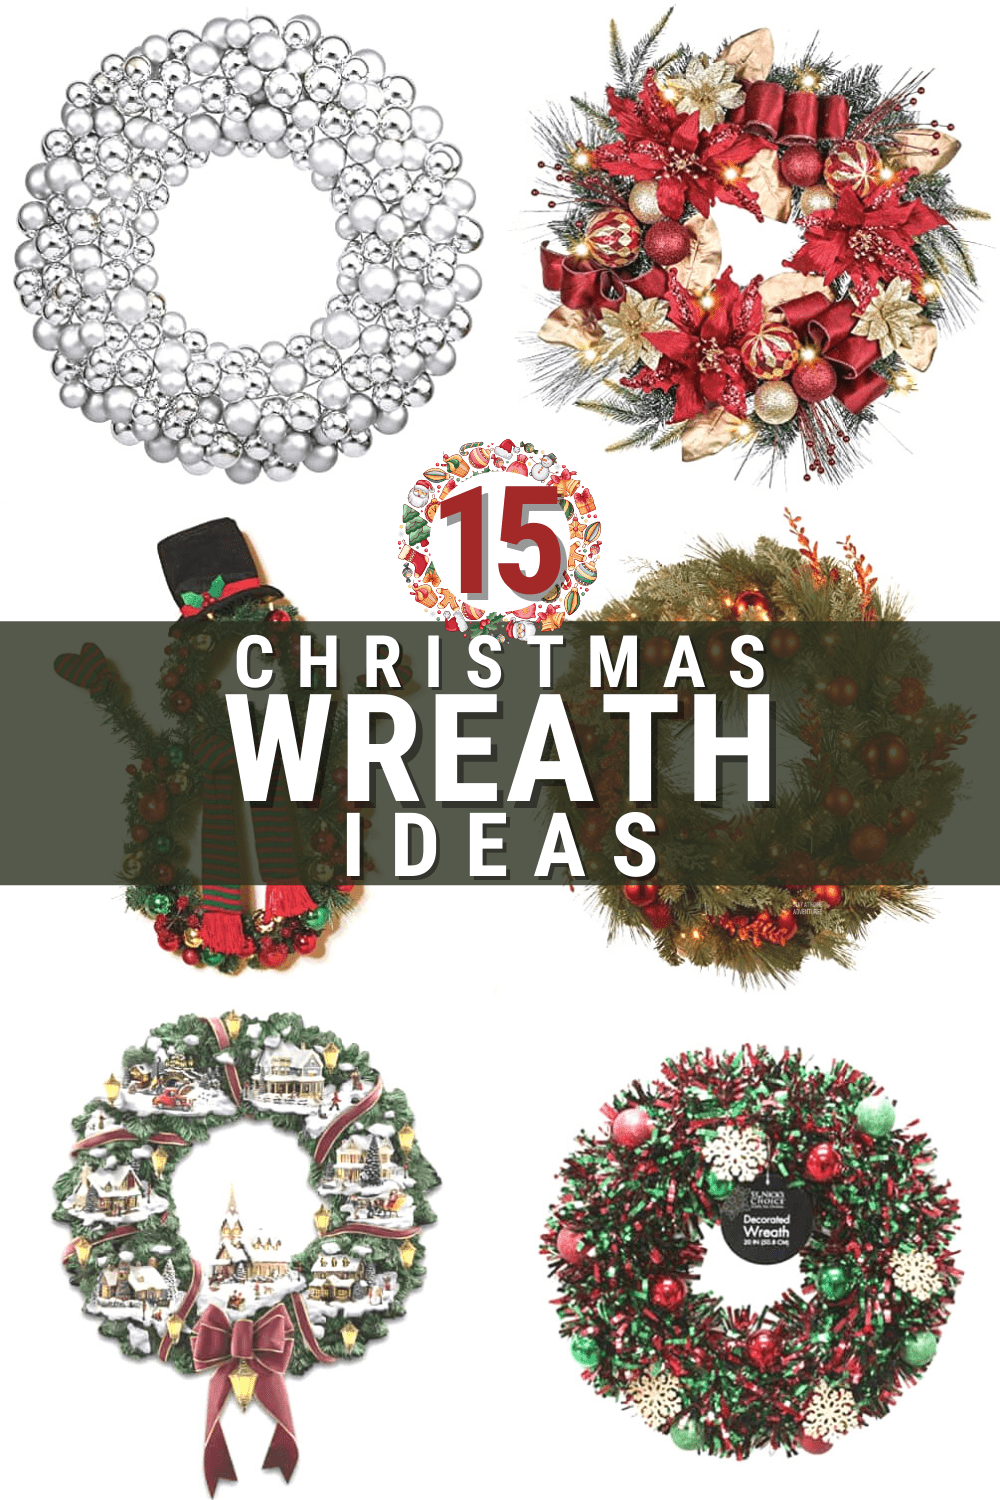 We all know the magical feeling that comes with decorating for Christmas, especially when you have a lovely wreath on your door or front porch. Here are some inspiring ideas to get you started! via @mystayathome